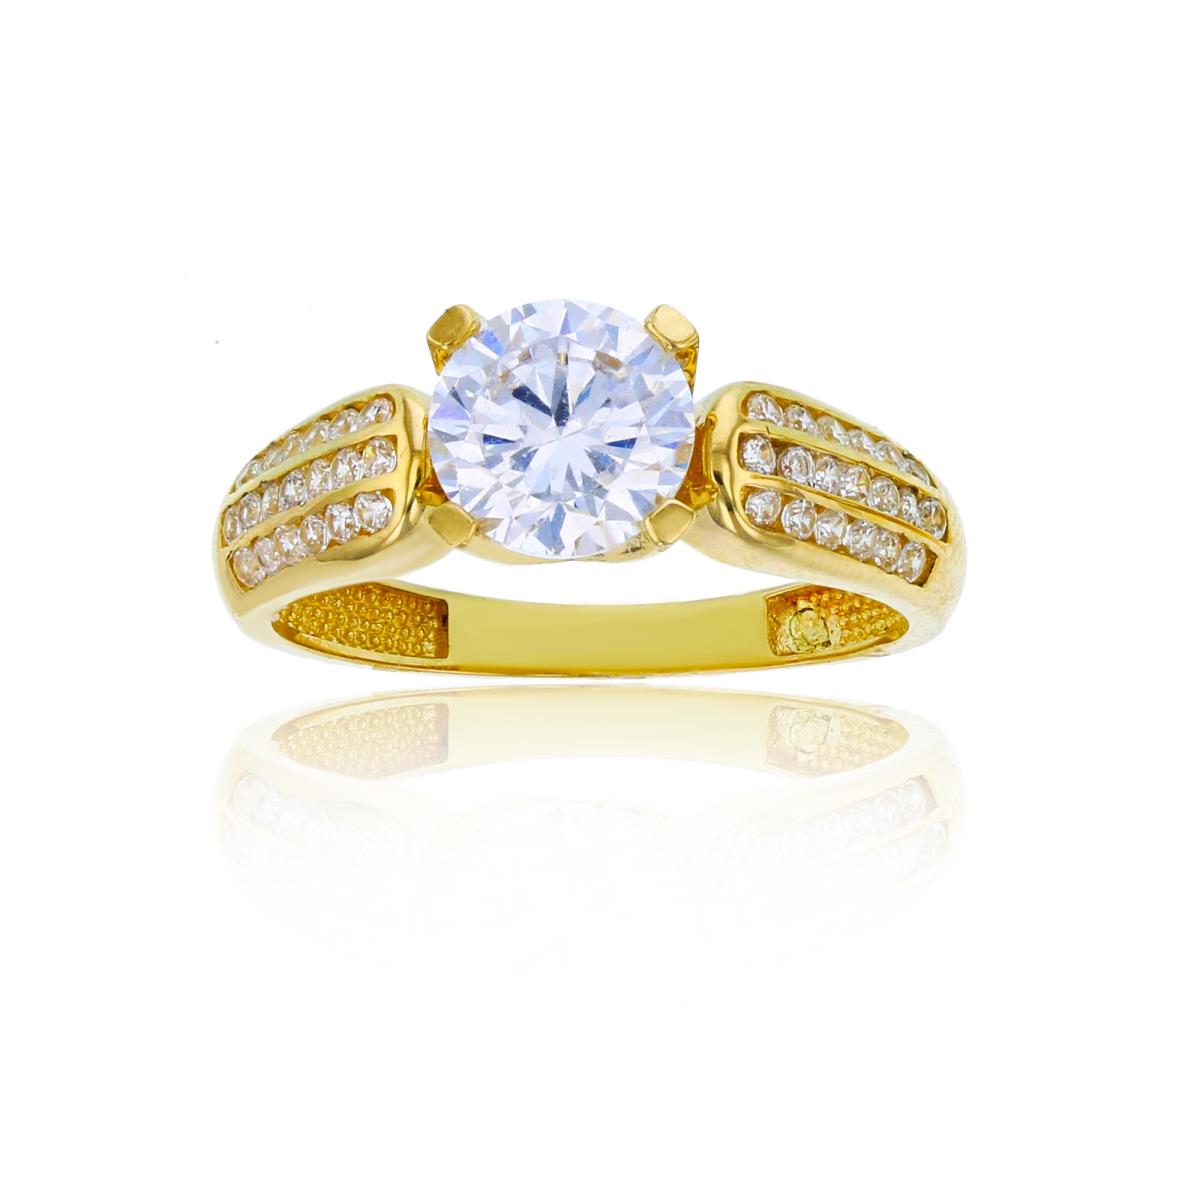 10K Yellow Gold 7mm Round Cut CZ 3-Row Pave Sides Engagement Ring